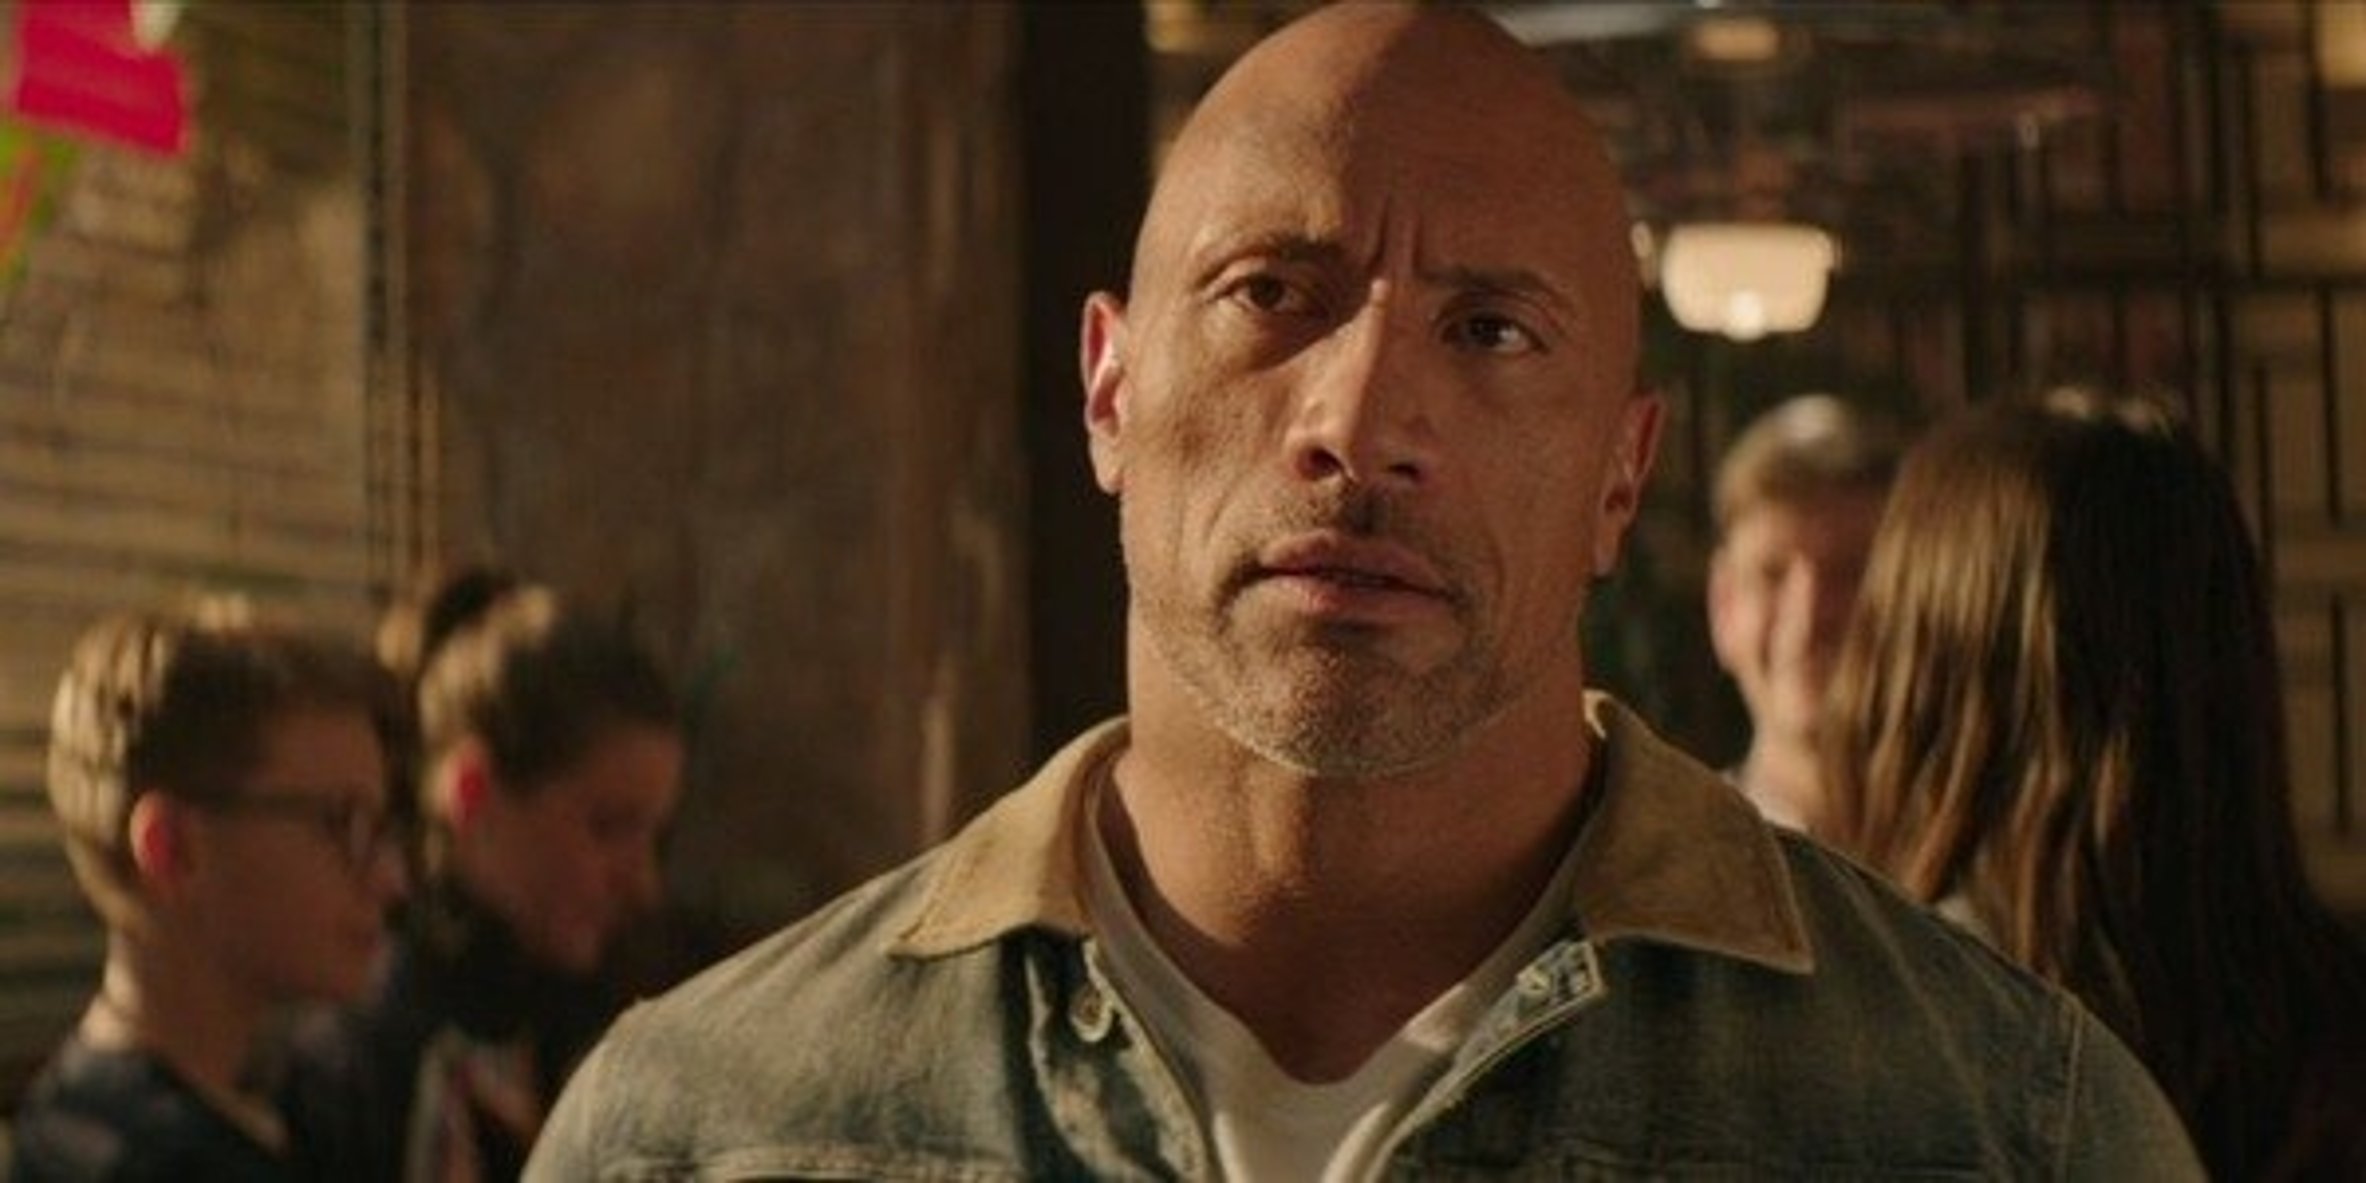 Dwayne Johnson Reveals ‘Weird’ Way He Coped During Pandemic Isolation